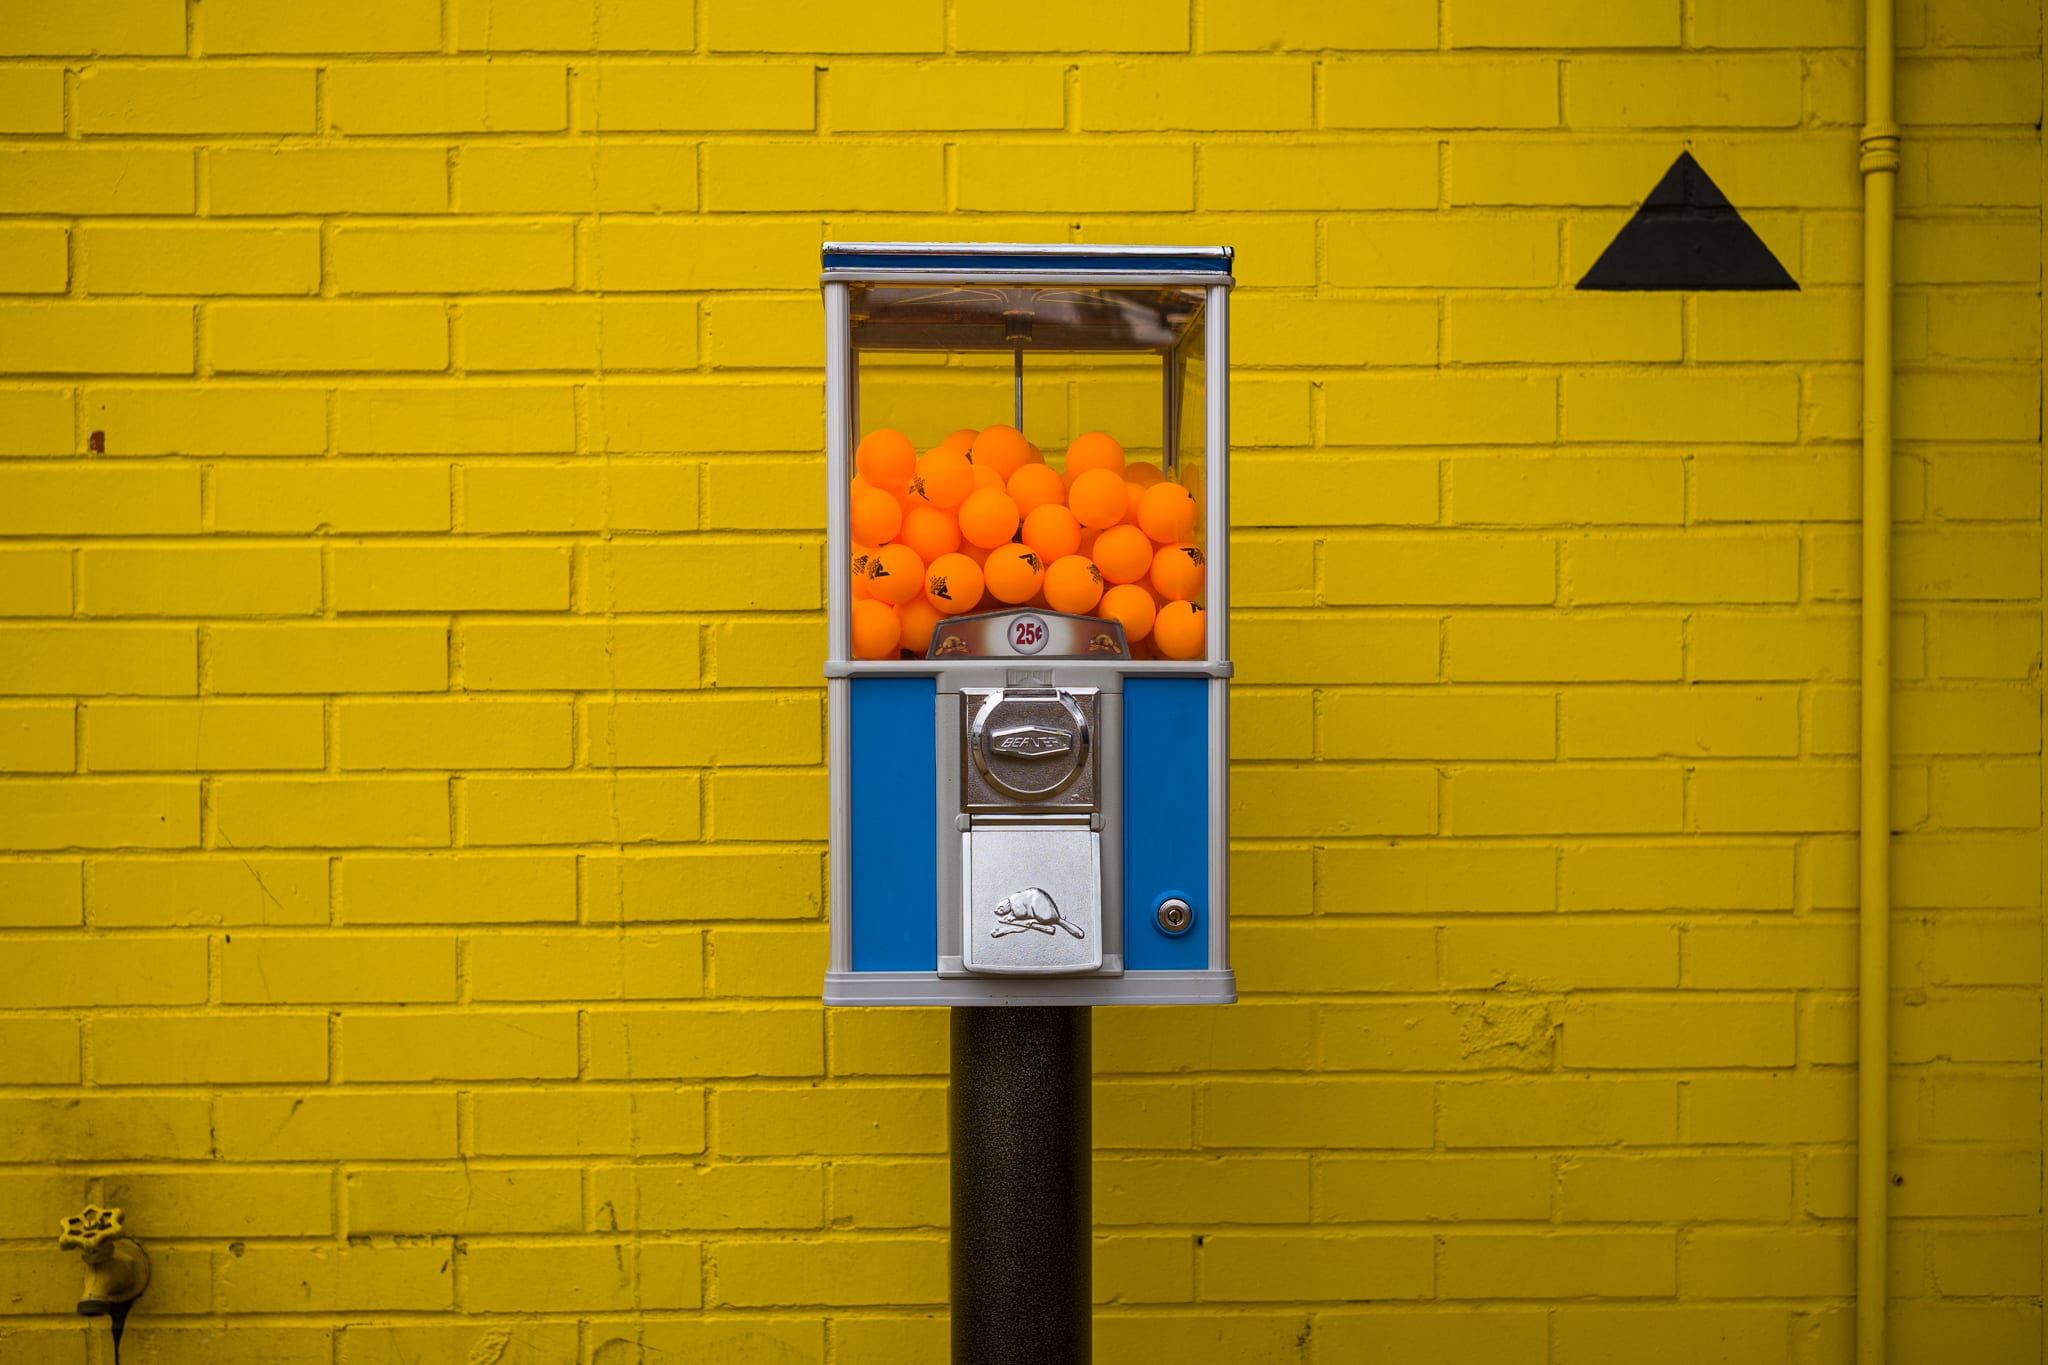 ping pong ball dispenser in front of yellow brick wall